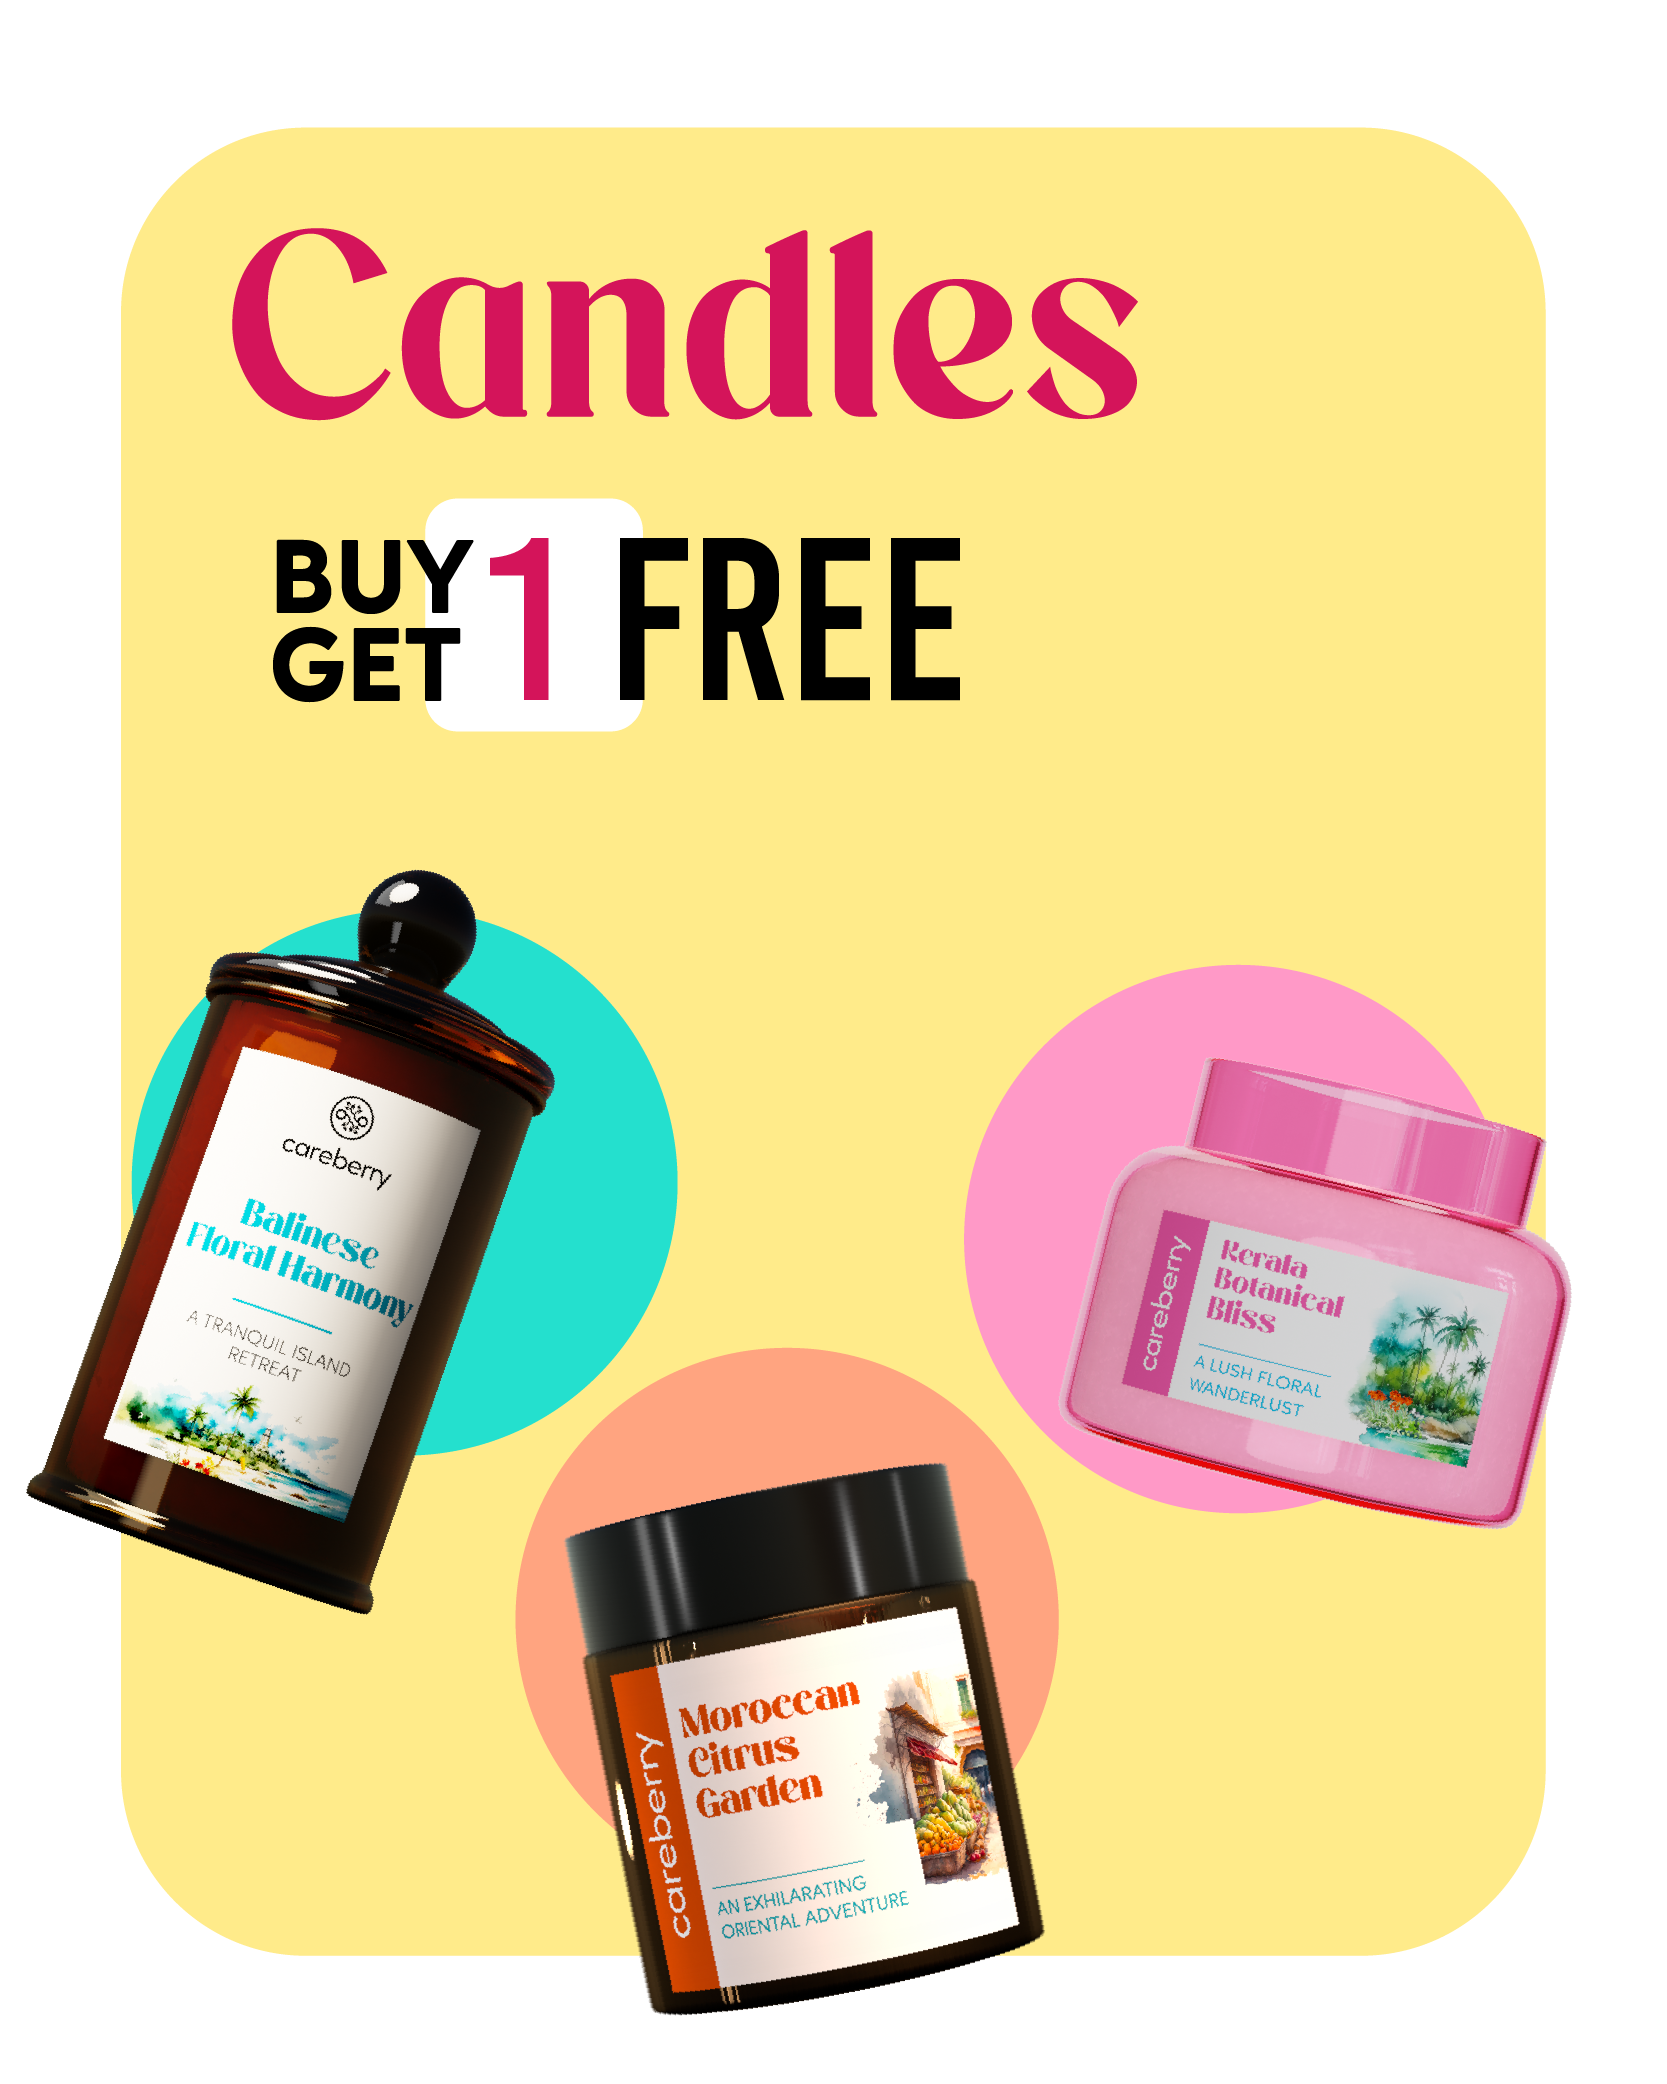 Buy 1 candle and get 1 candle free